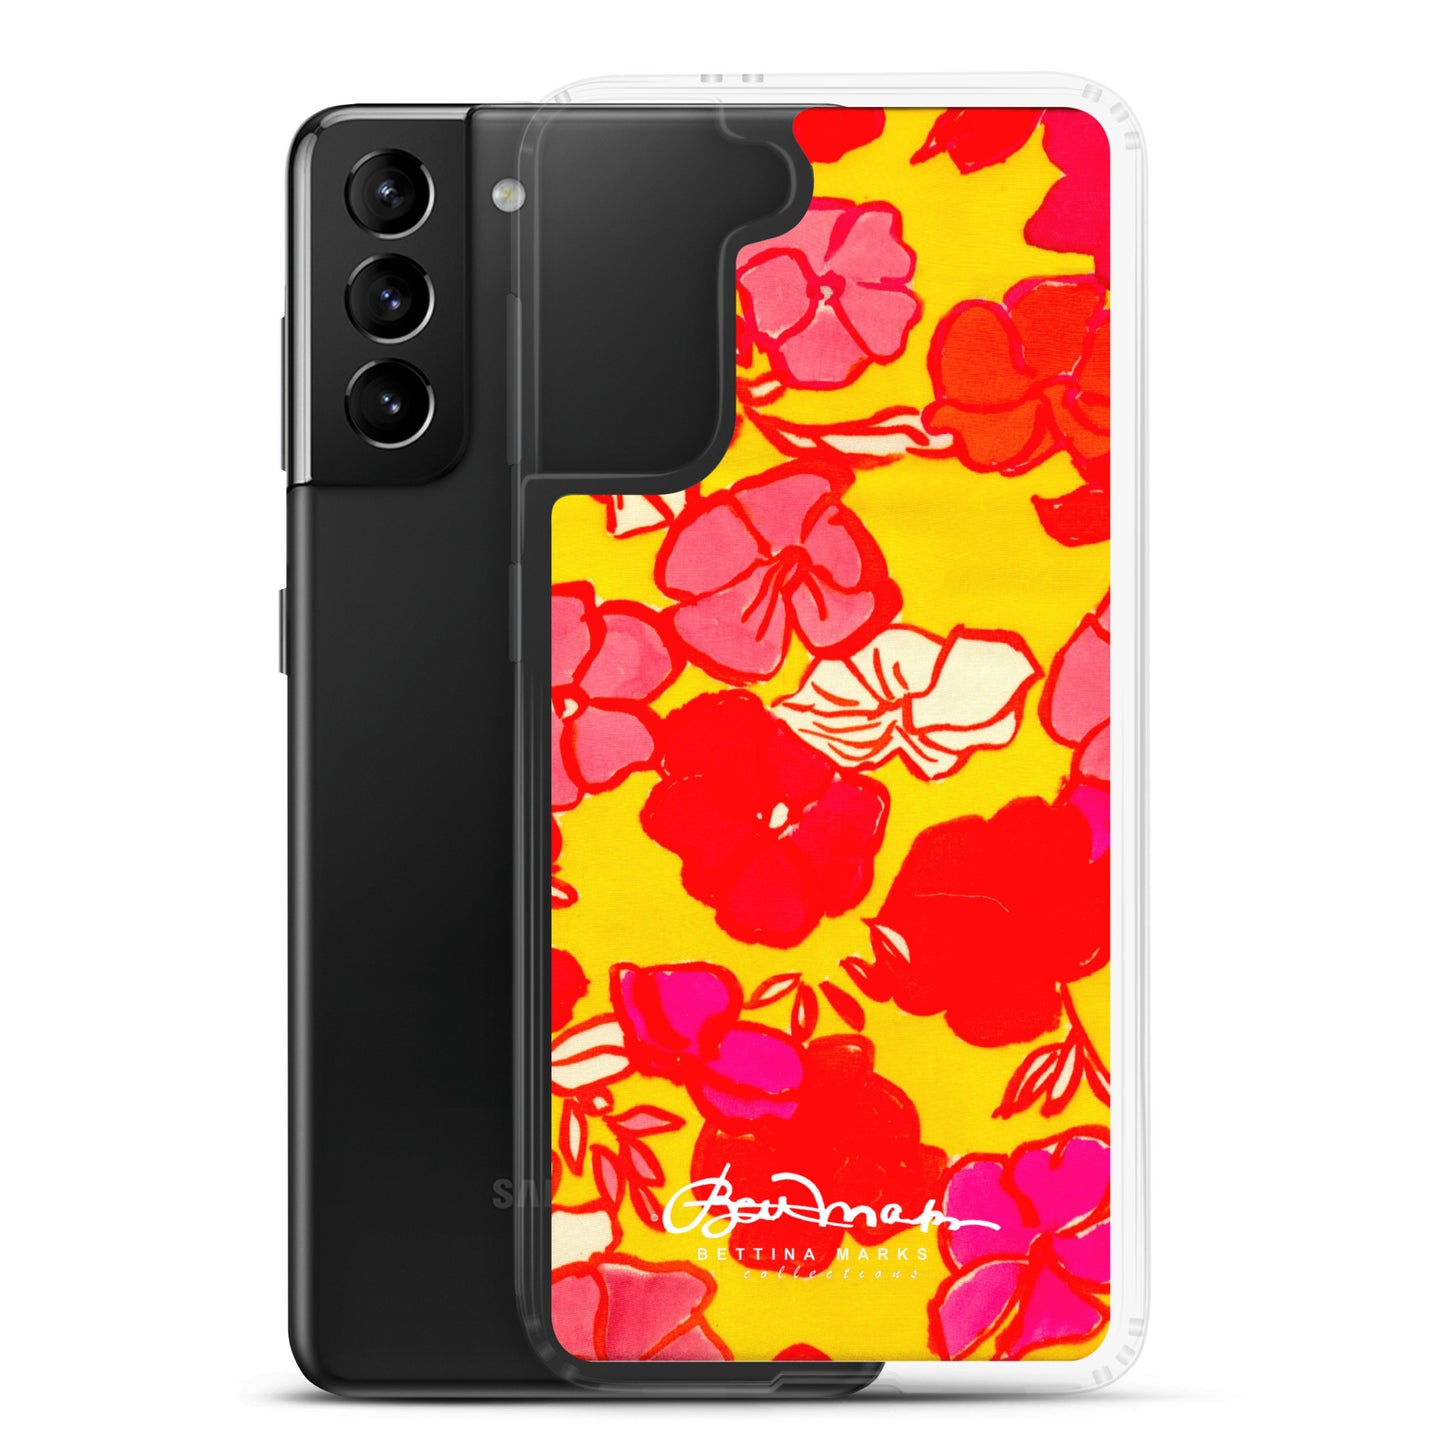 Sixties Floral Samsung Case (select model)